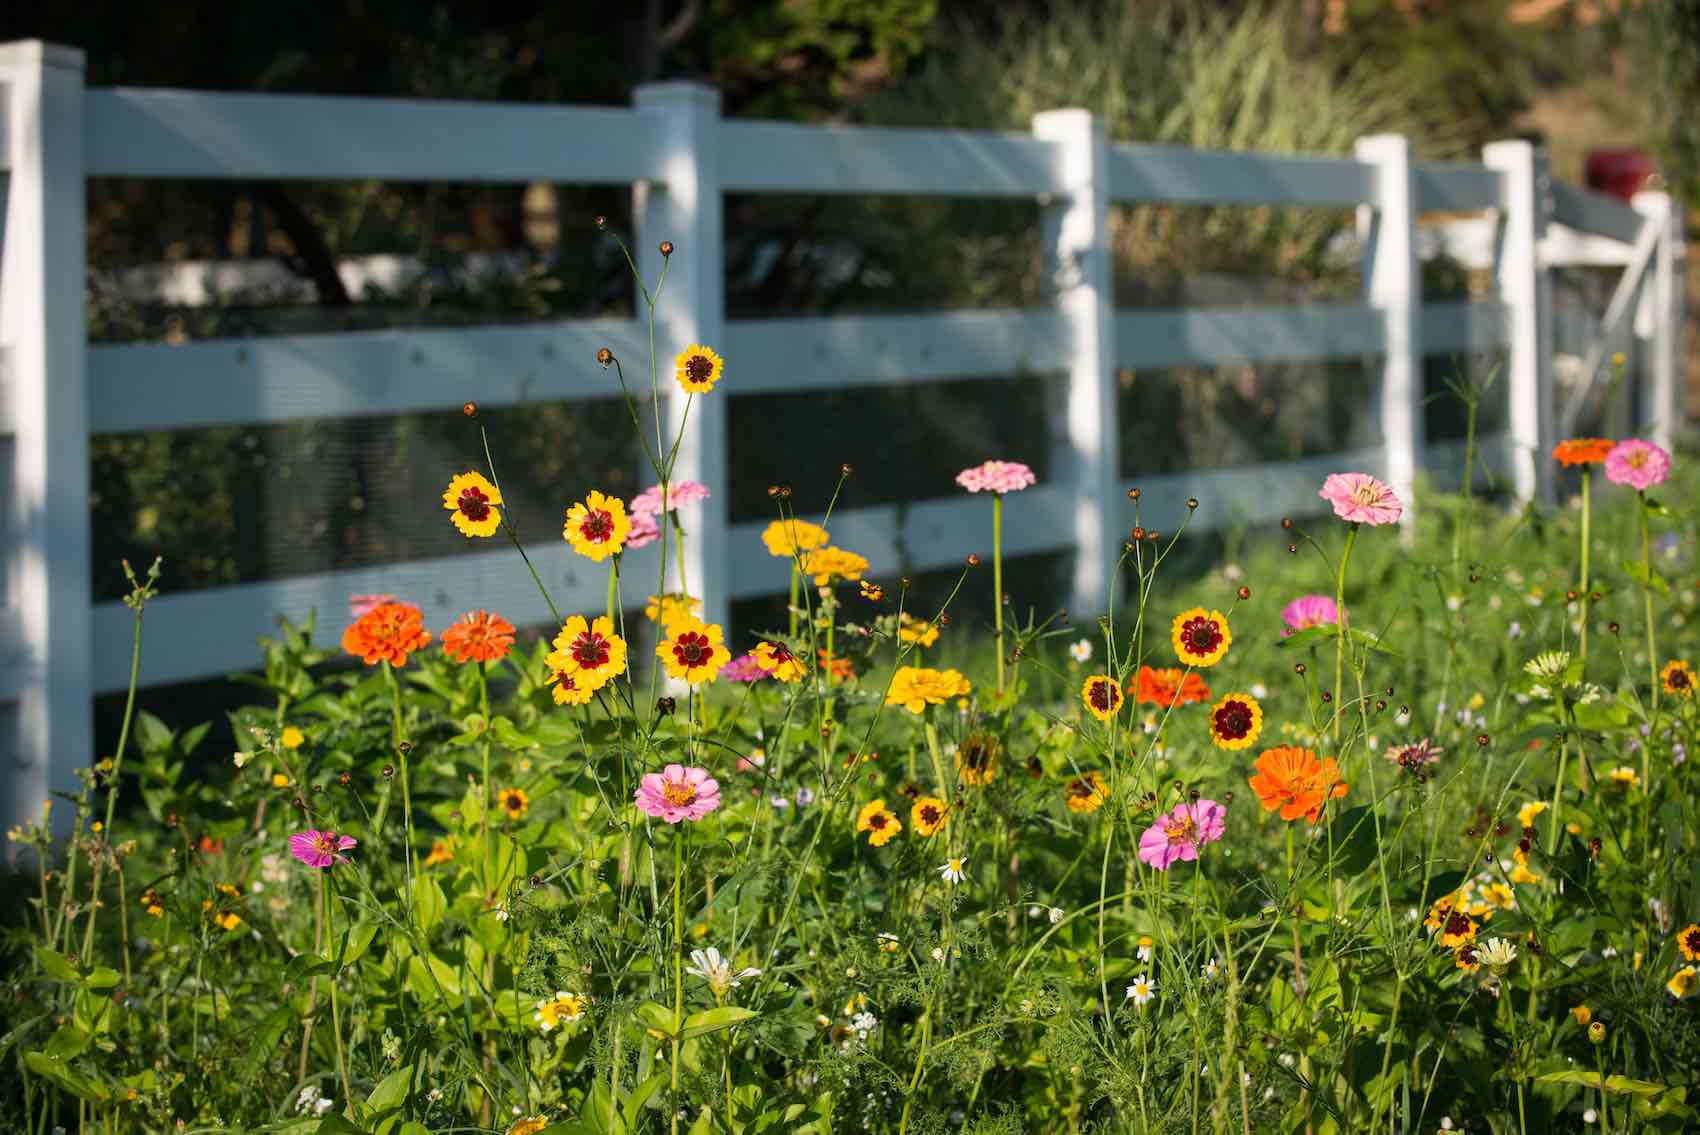 Wildflower groves bursting with color at Country Willows Inn & Estate in Ashland, Oregon beckon bees and butterflies.